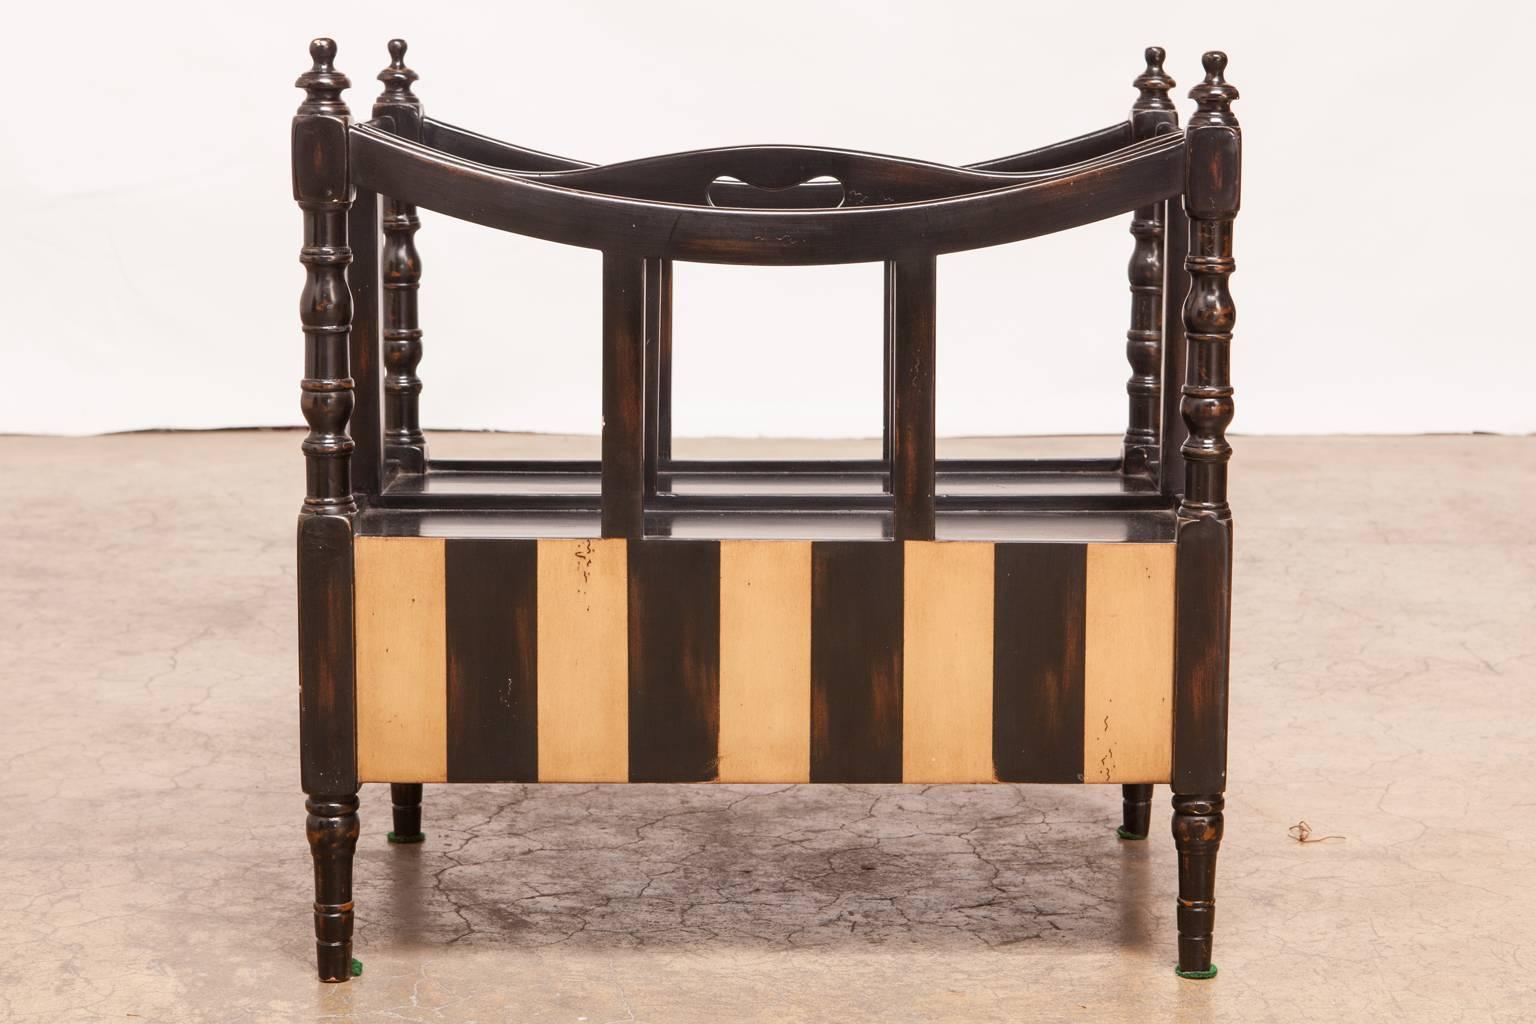 Gorgeous French style Canterbury featuring an ebonized lacquer finish with ivory accent stripes by Theodore Alexander's 